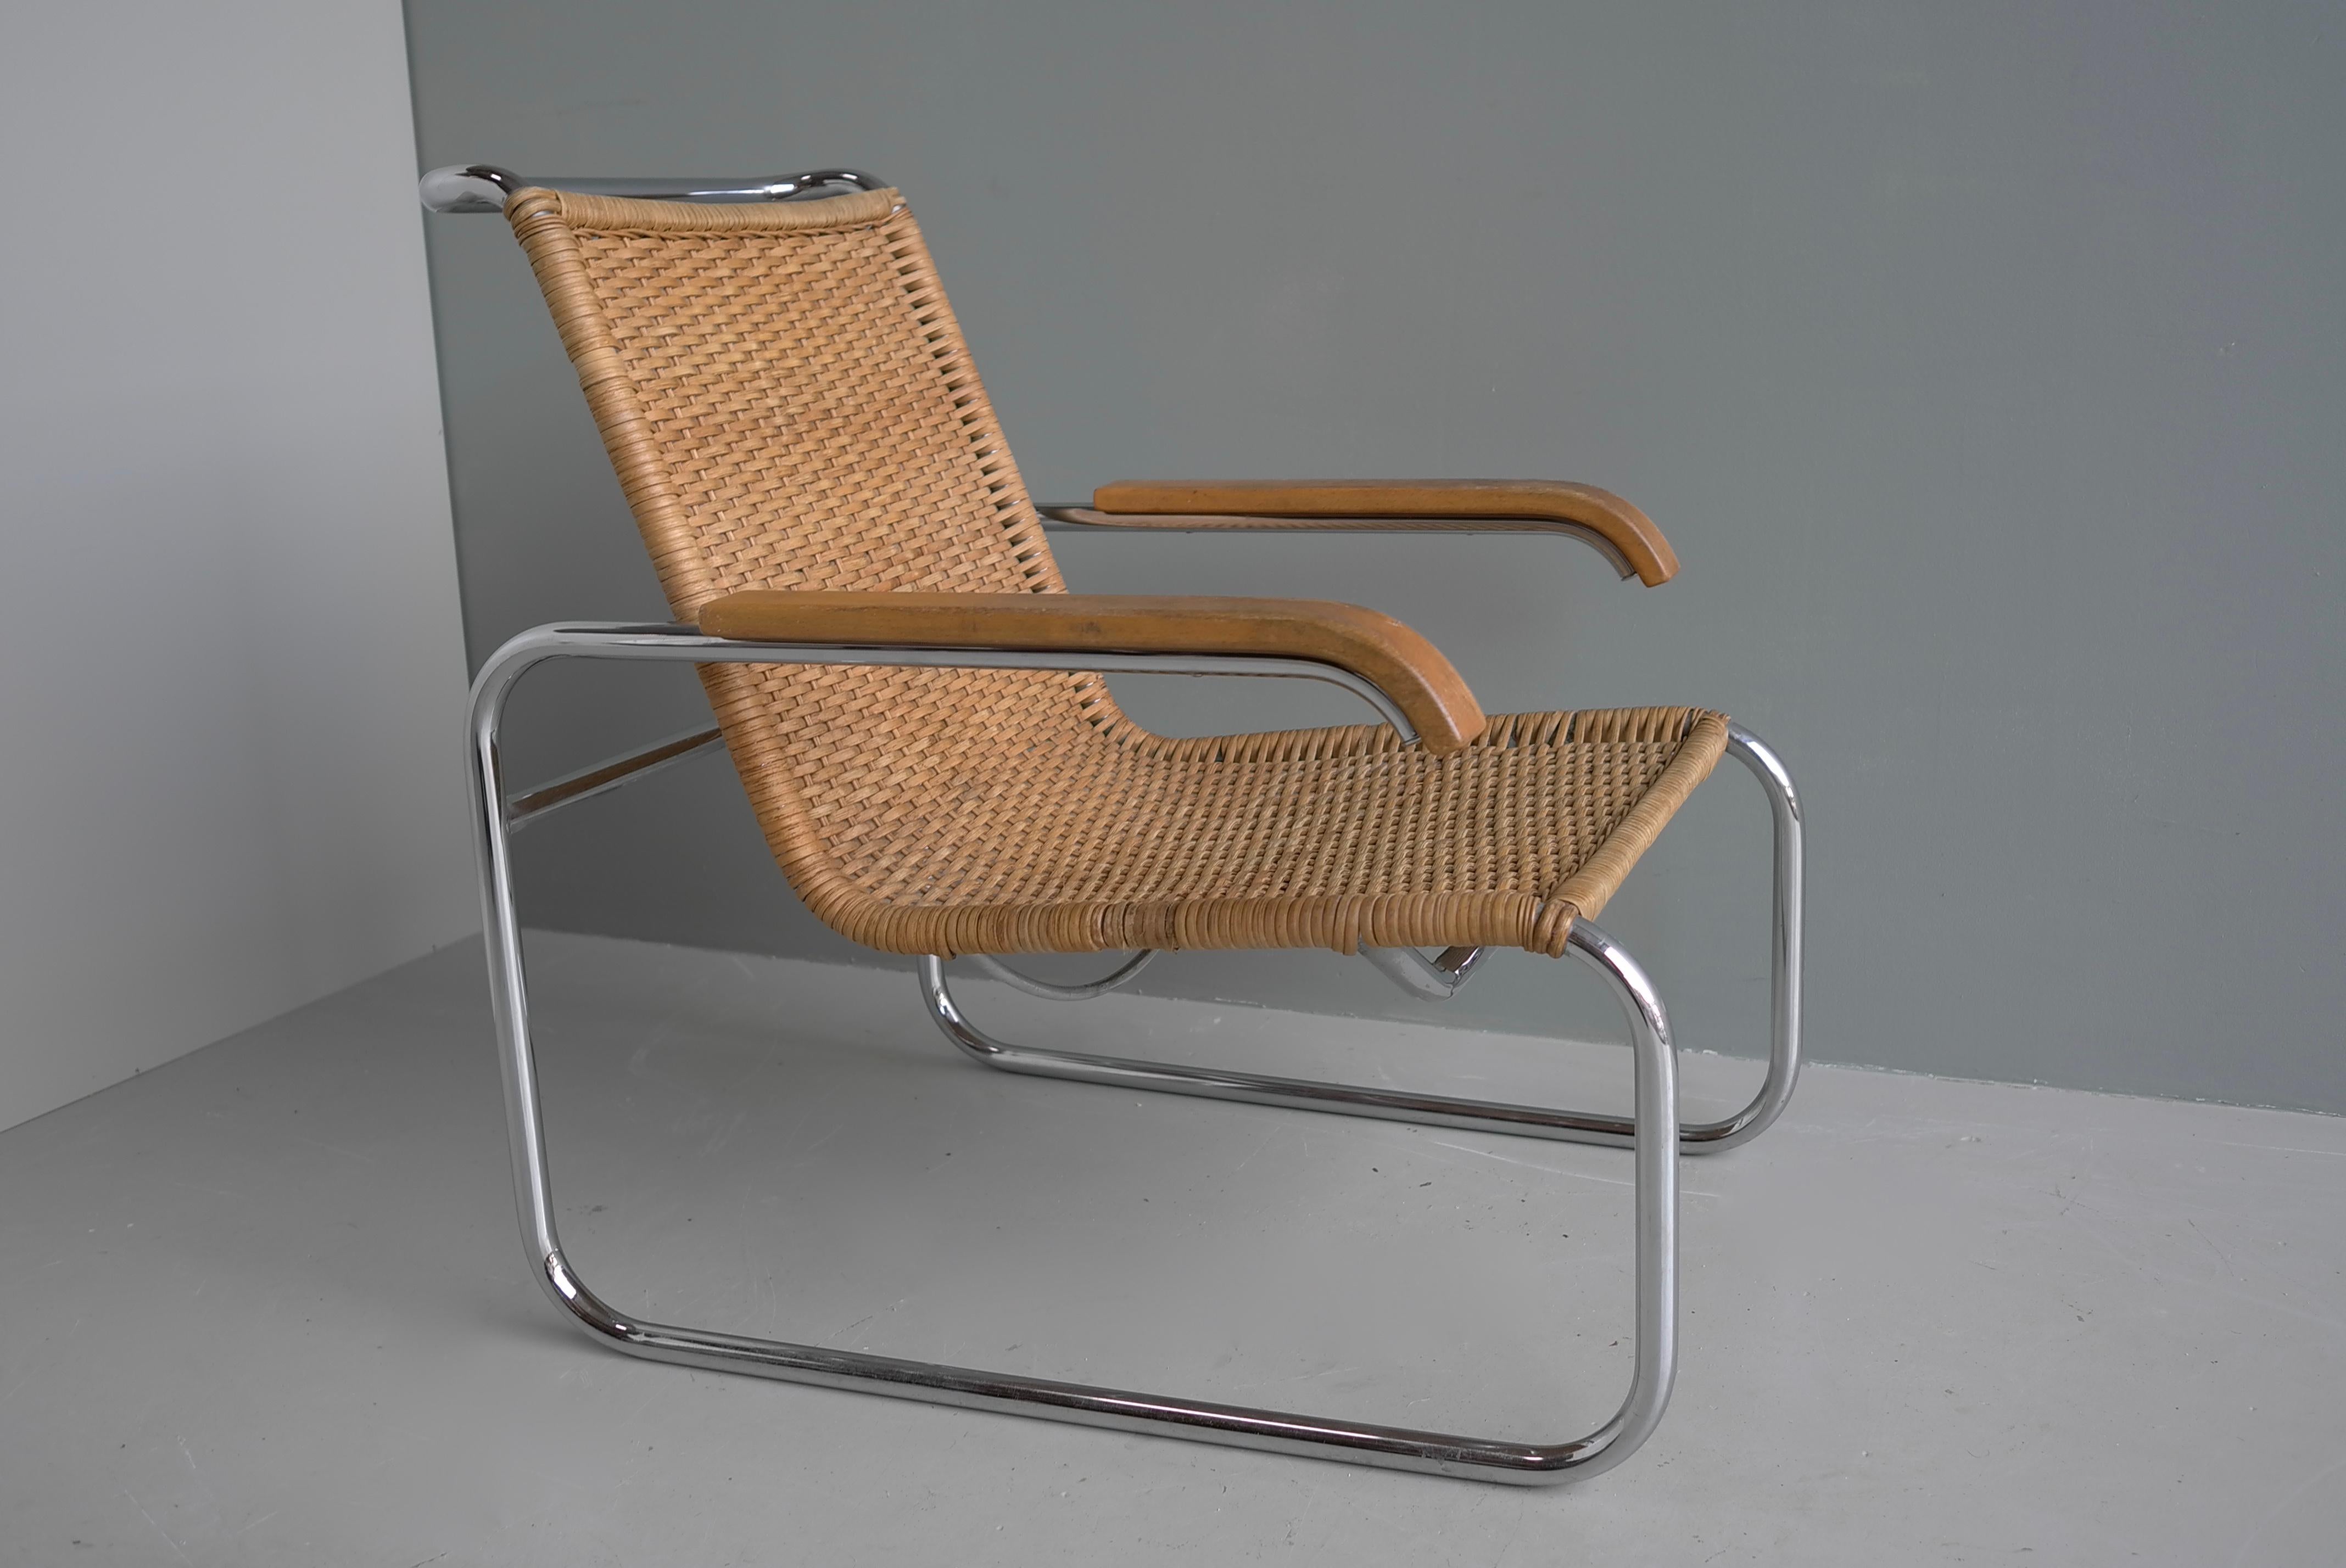 Sublime Bauhaus design by Marcel Breuer the B35 armchair by Thonet circa 1960s, the cantilever frame with woven rattan seat, wooden armrests with a chromed tubular steel frame. Purchased at Metz en co early 1960's, it wears the Thonet sticker